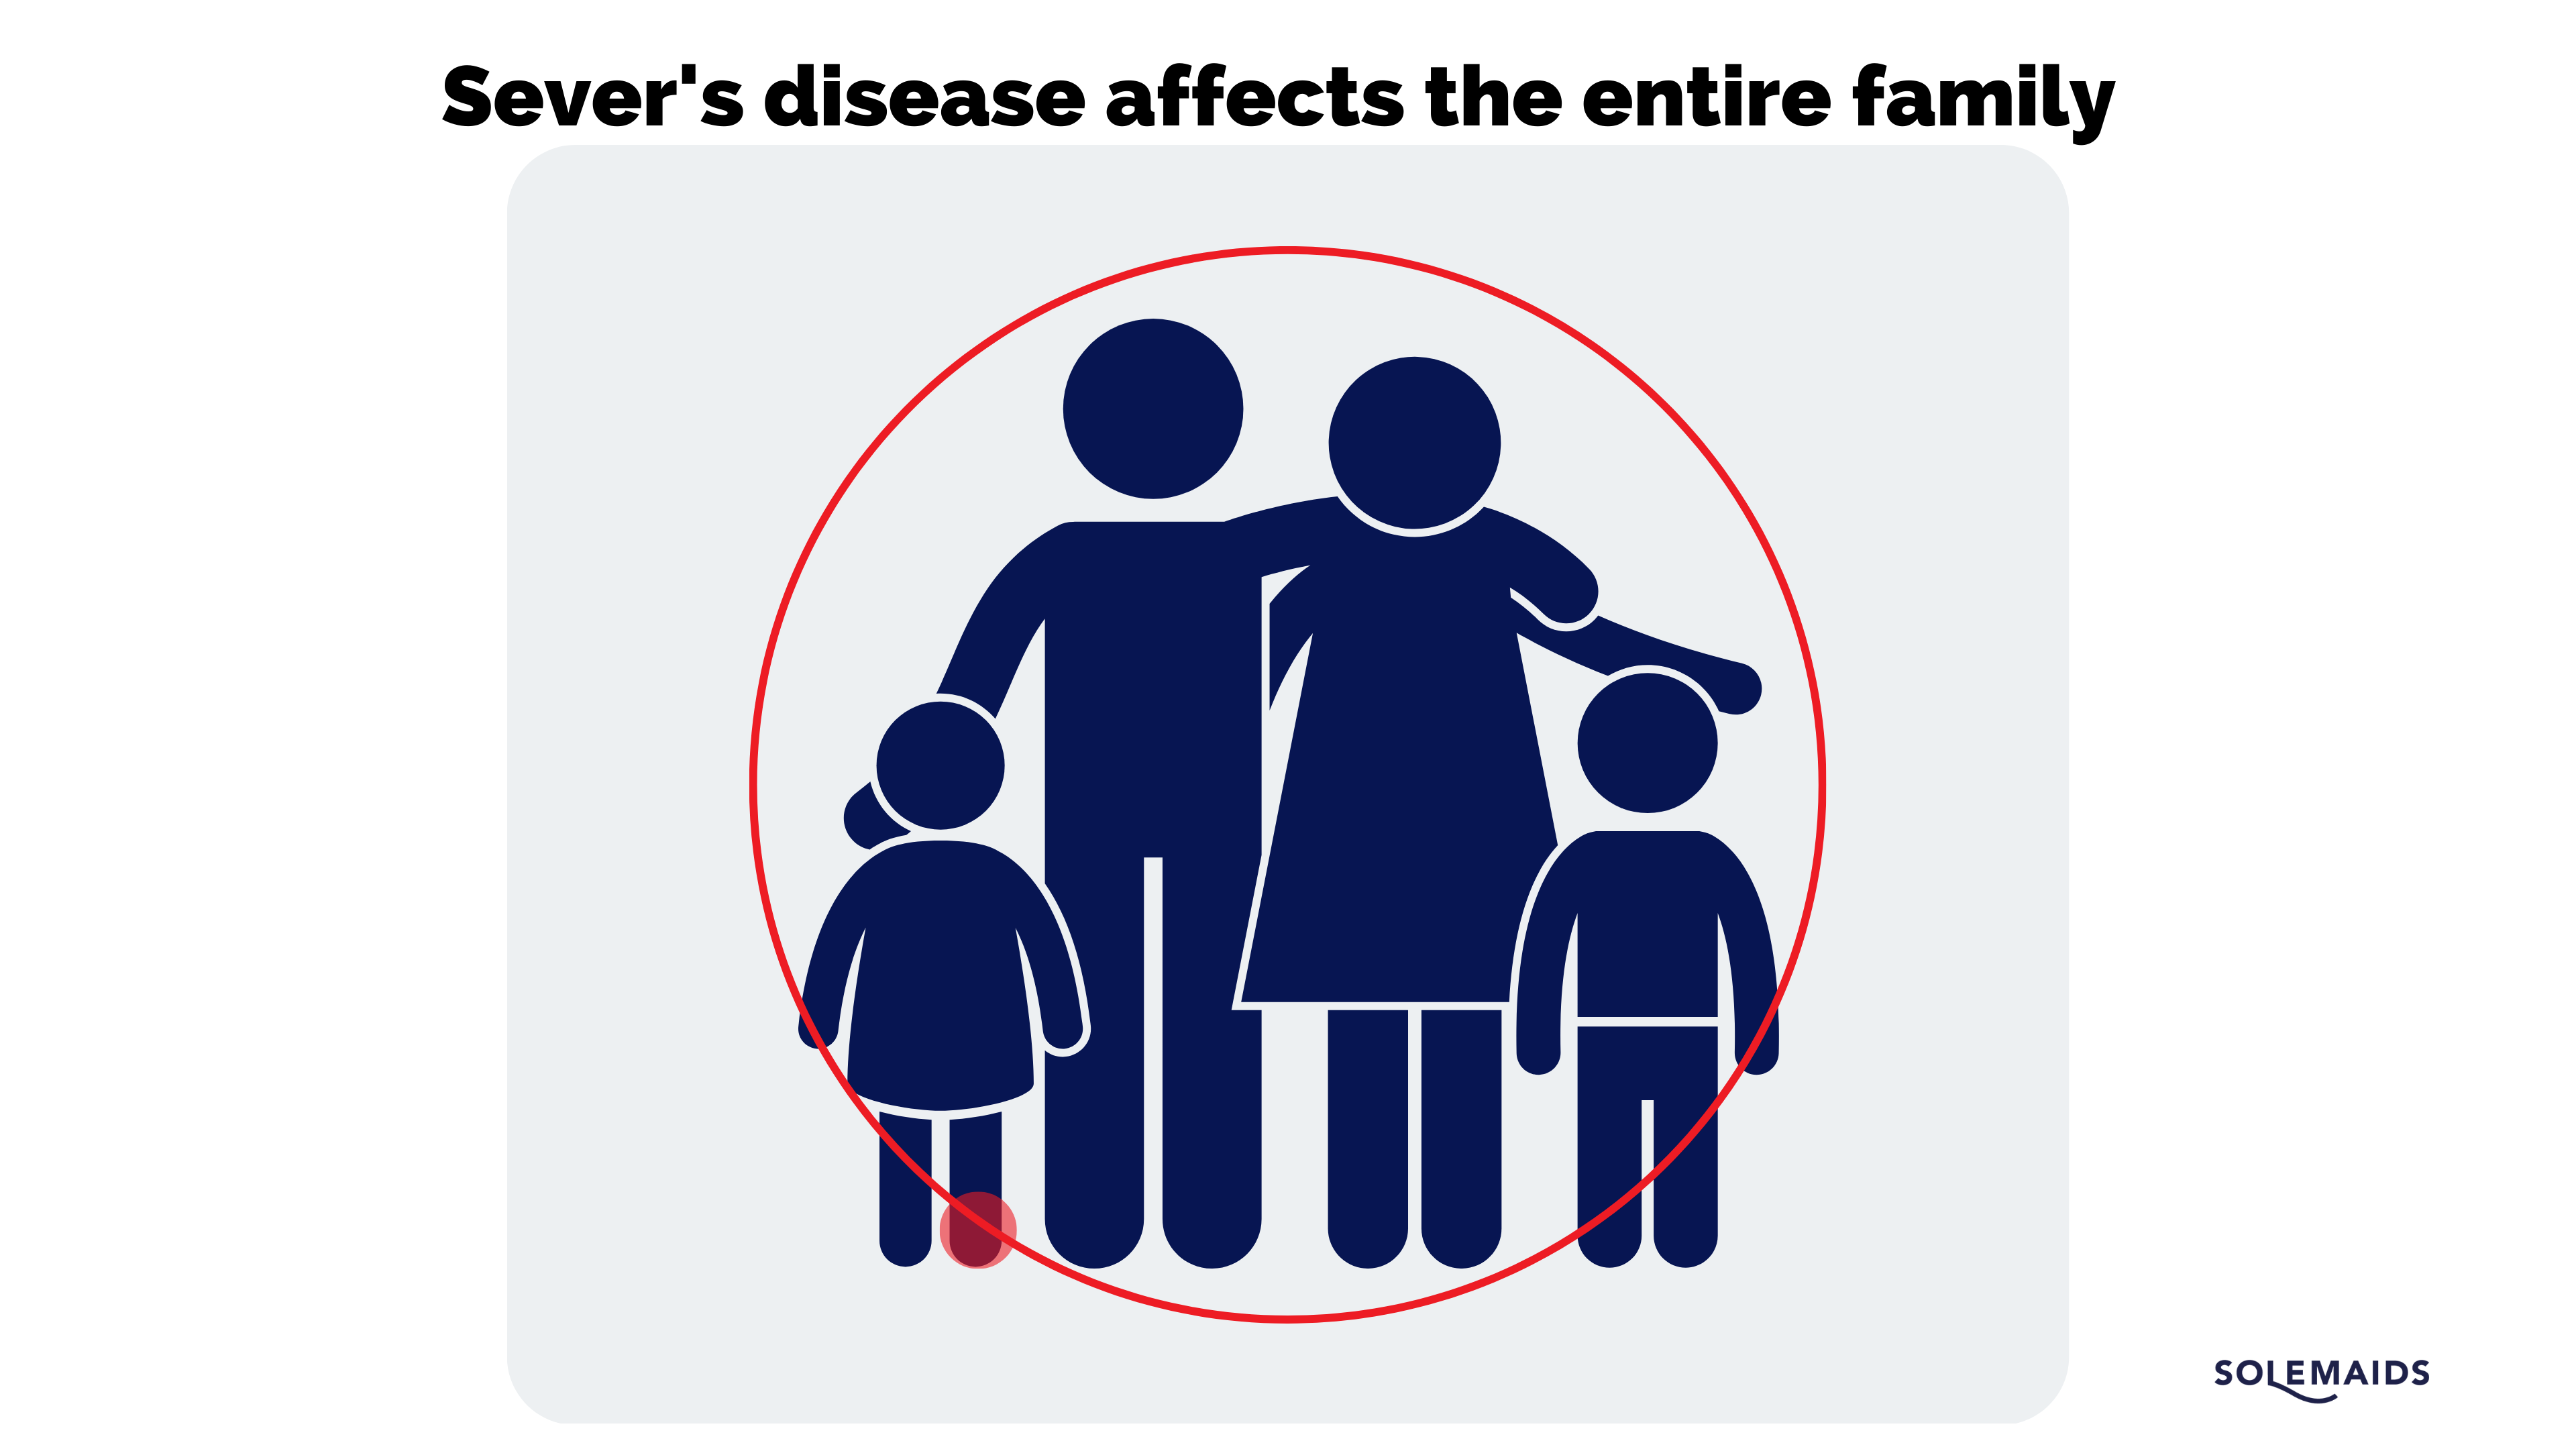 Sever's disease and family - affects children